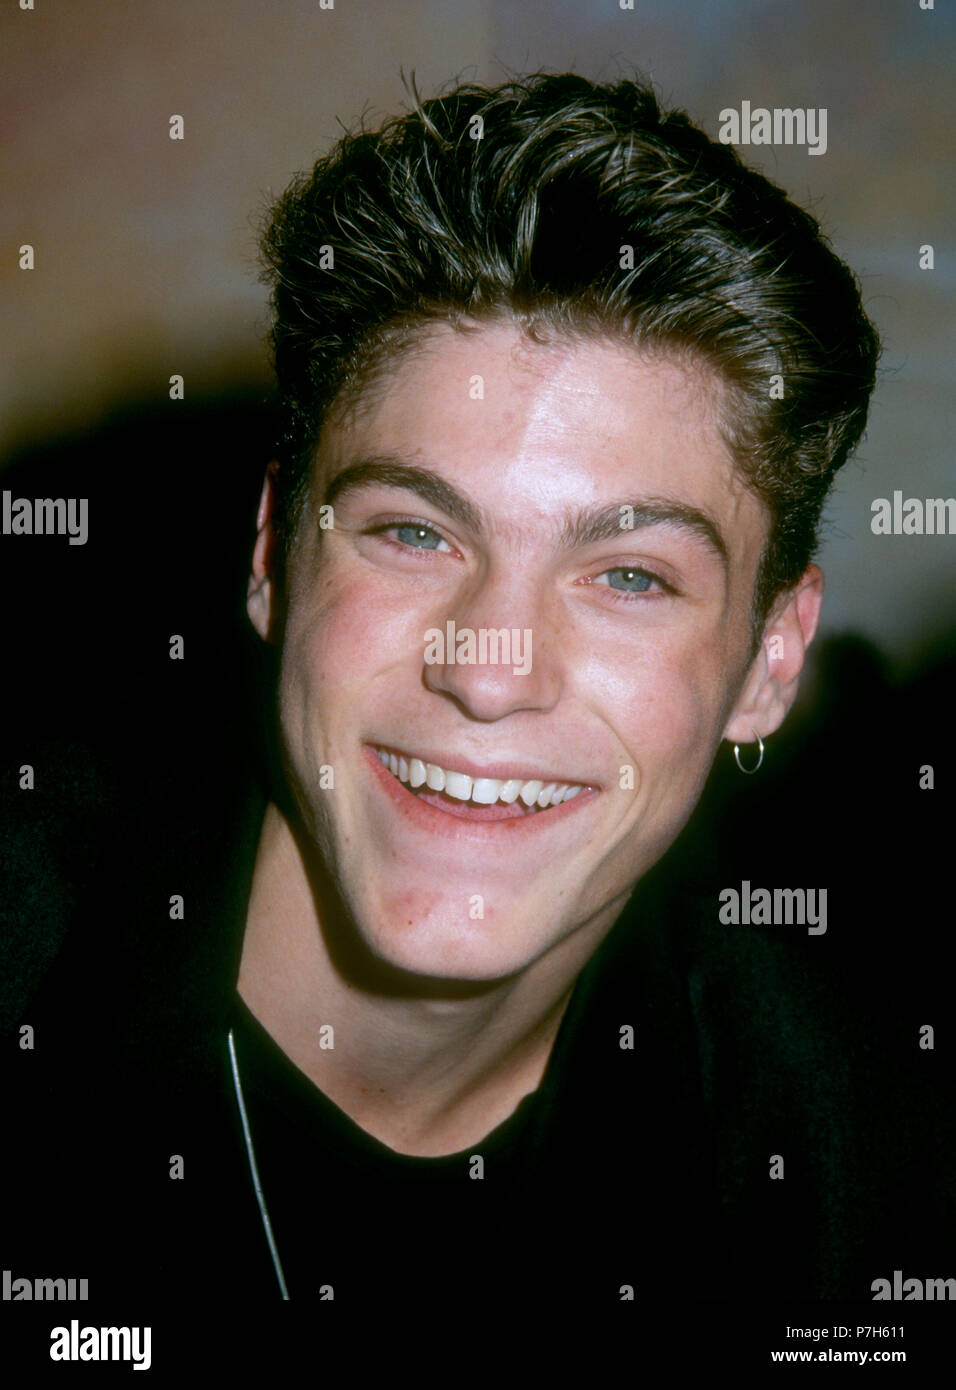 NORTHRIDGE, CA - JANUARY 25: Actor Brian Austin Green attends the launch of the release of 'Beverly Hills, 90210' series pilot on video on January 25, 1992 at the Wherehouse in Northridge, California. Photo by Barry King/Alamy Stock Photo Stock Photo